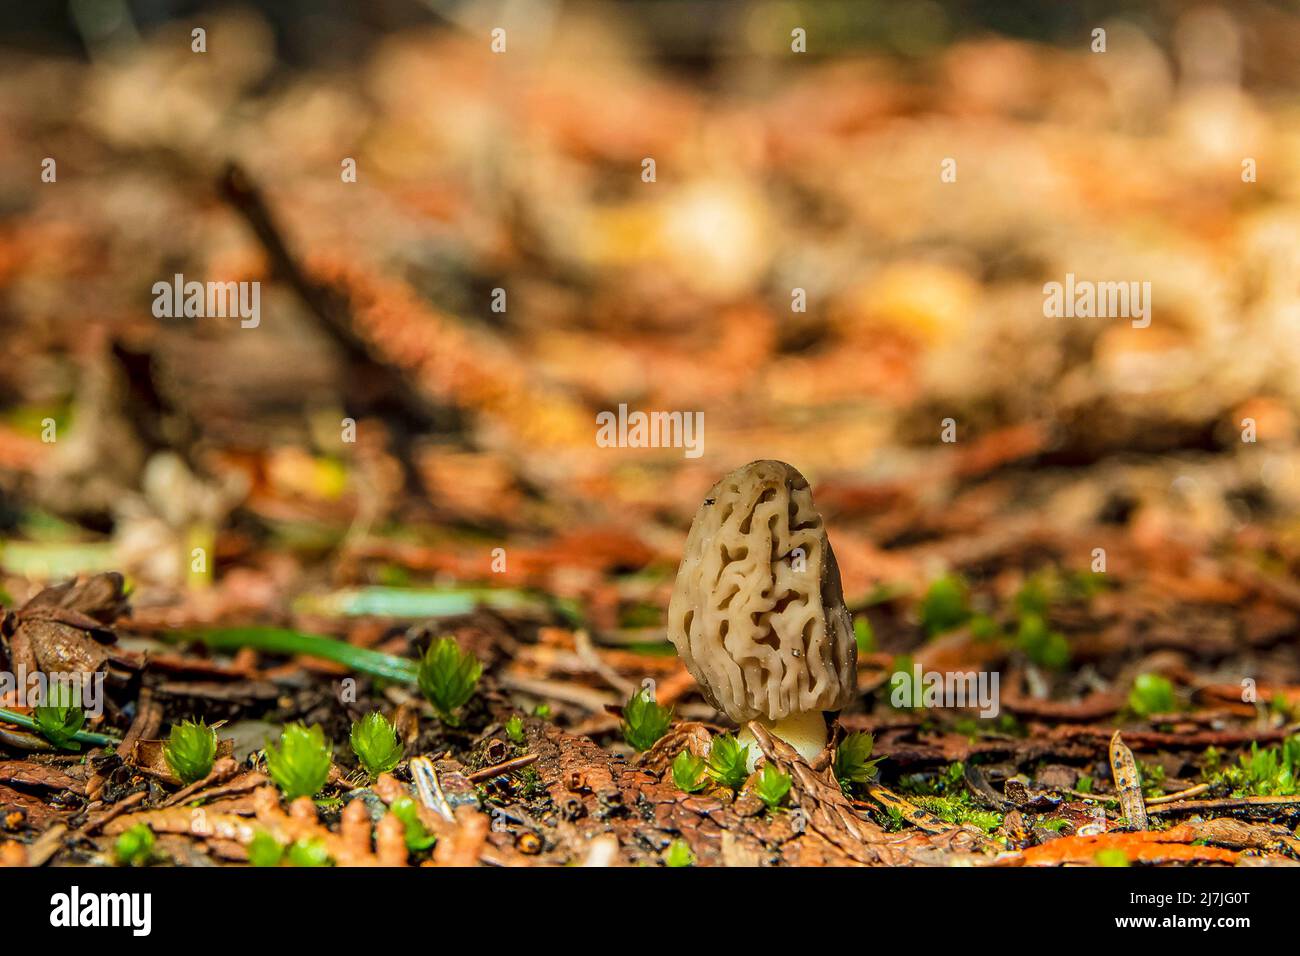 Small blonde morel mushrooms growing on the forest floor Stock Photo